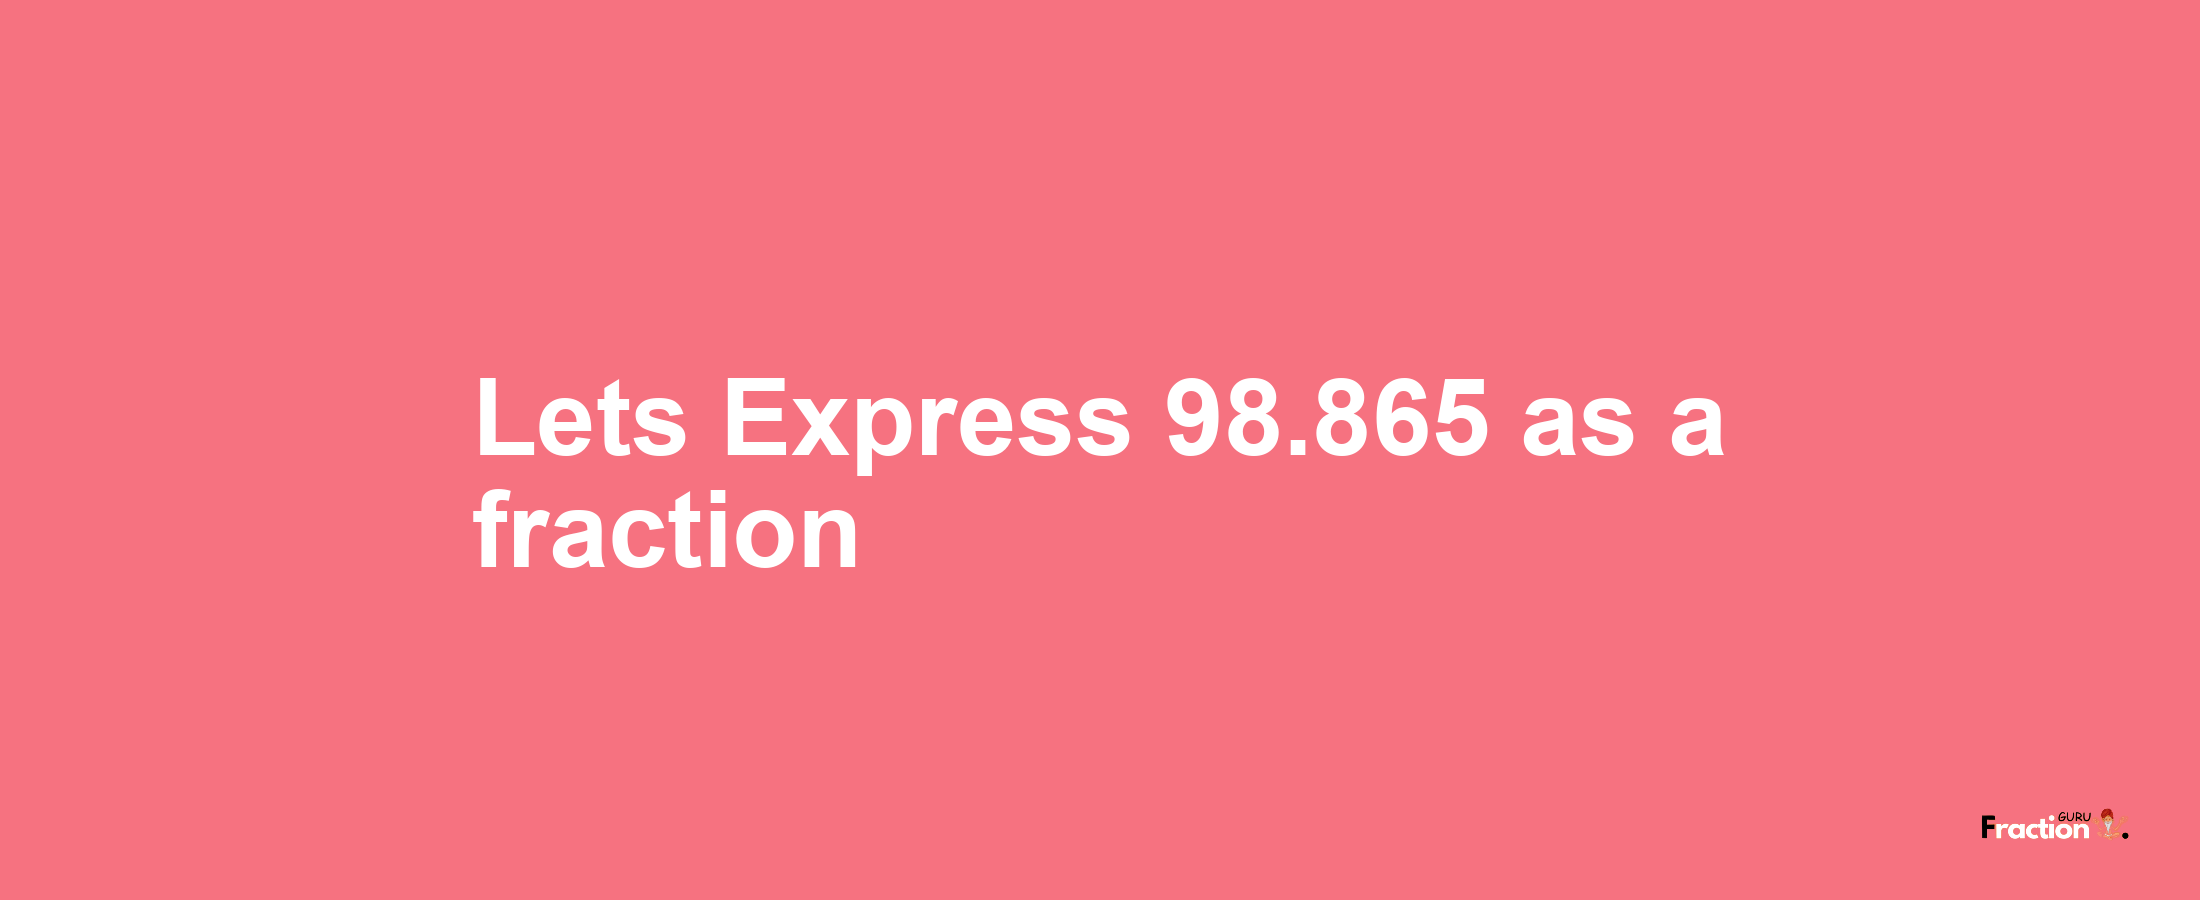 Lets Express 98.865 as afraction